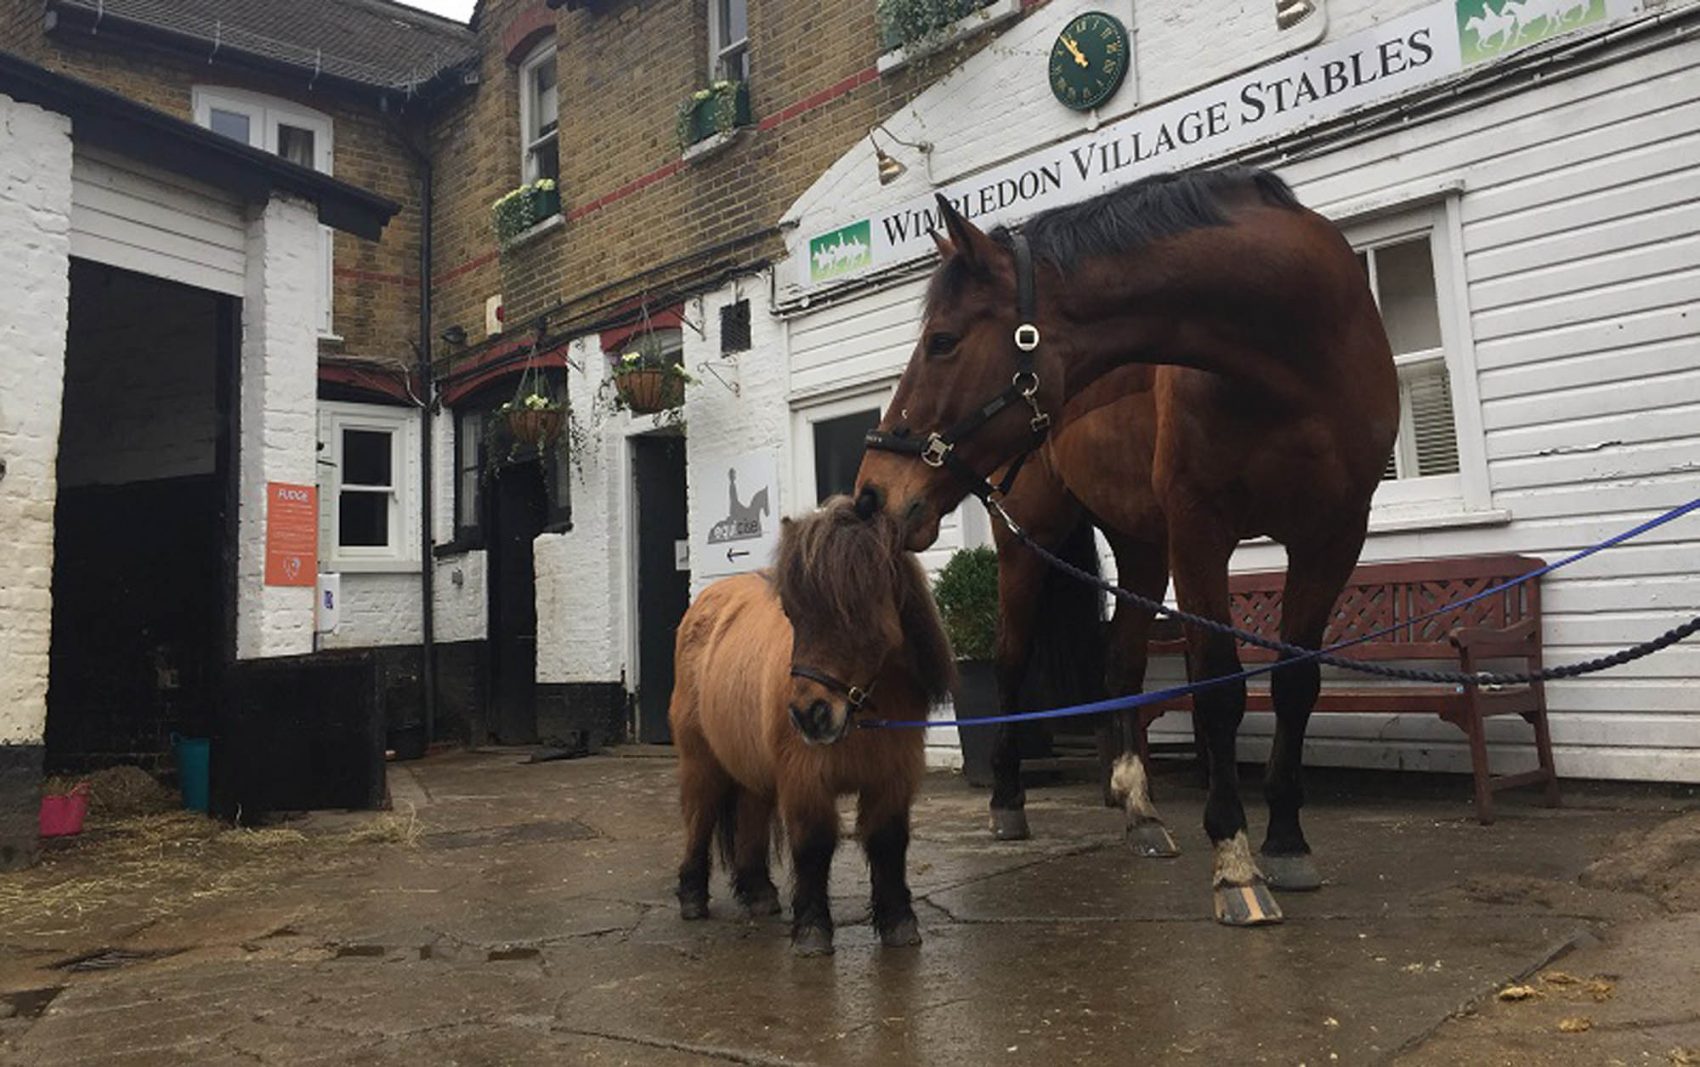 A horse and a shetland pony in the Wimbledon Village Stables